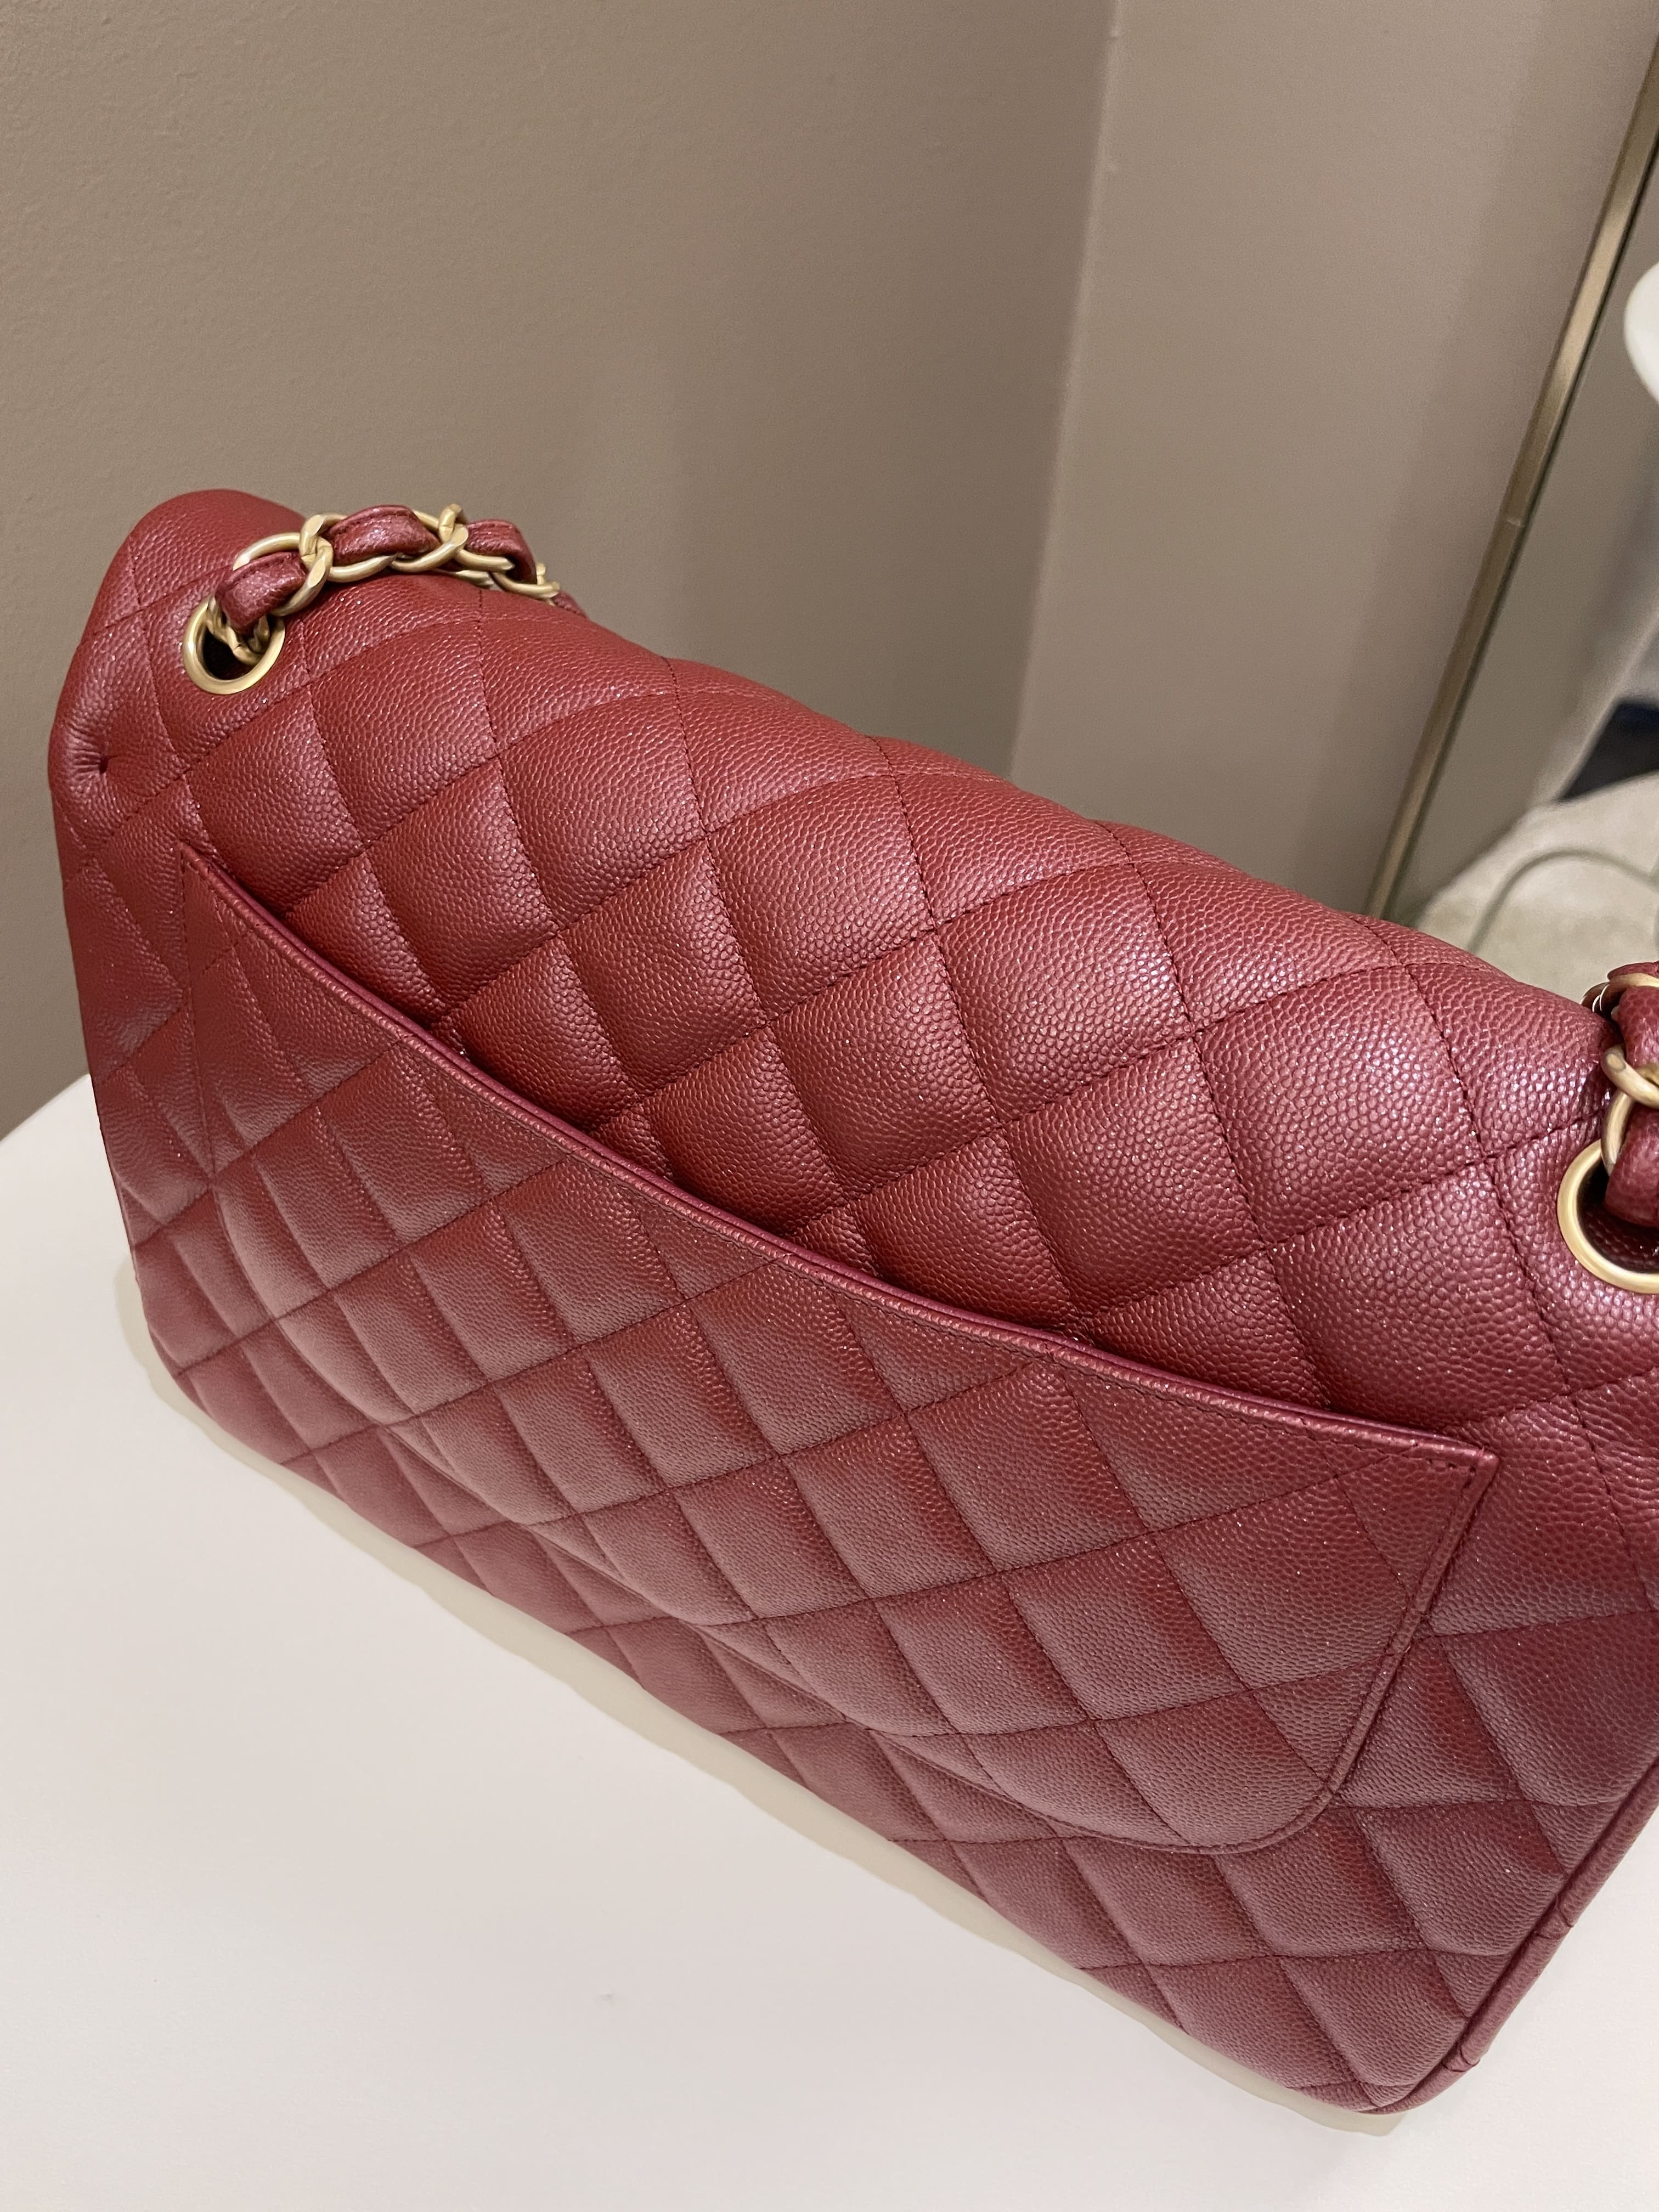 Chanel 18C Classic Quilted Jumbo Double Flap Iridescent Burgundy